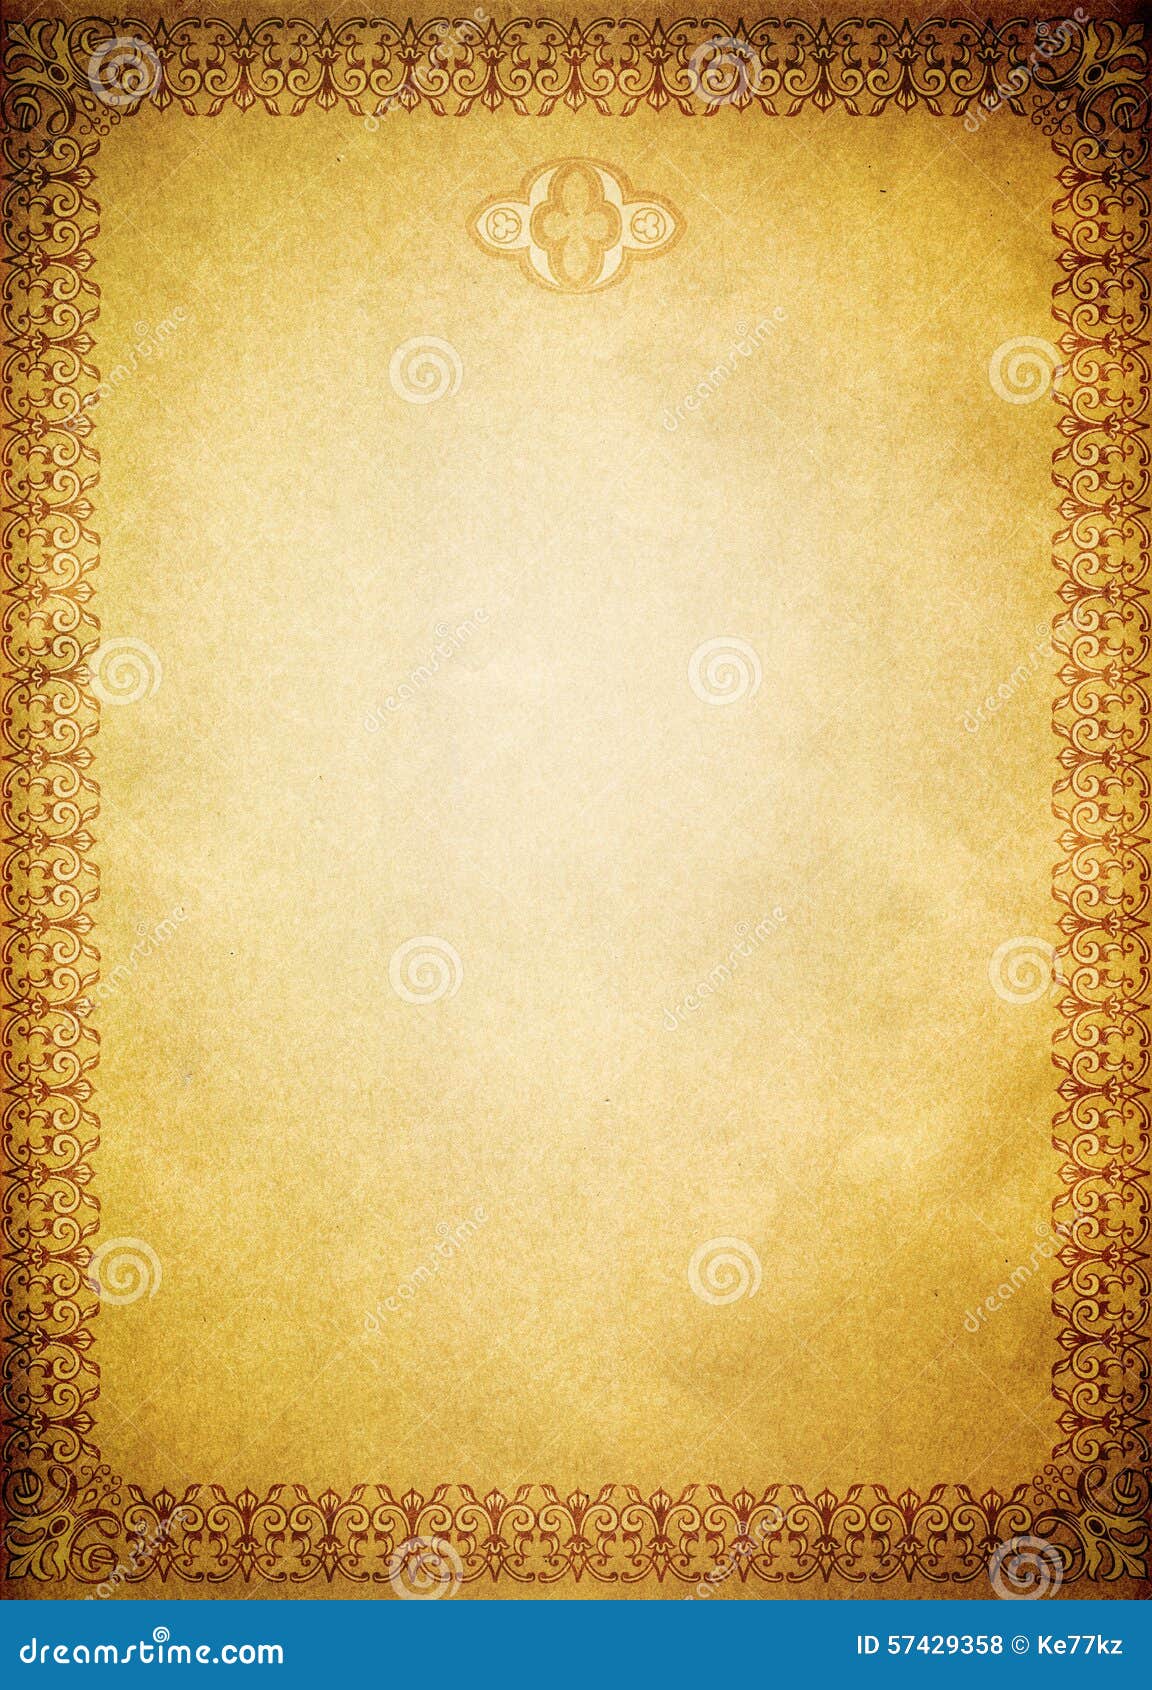 Old paper background with vintage border. Stock Photo by ©ke77kz